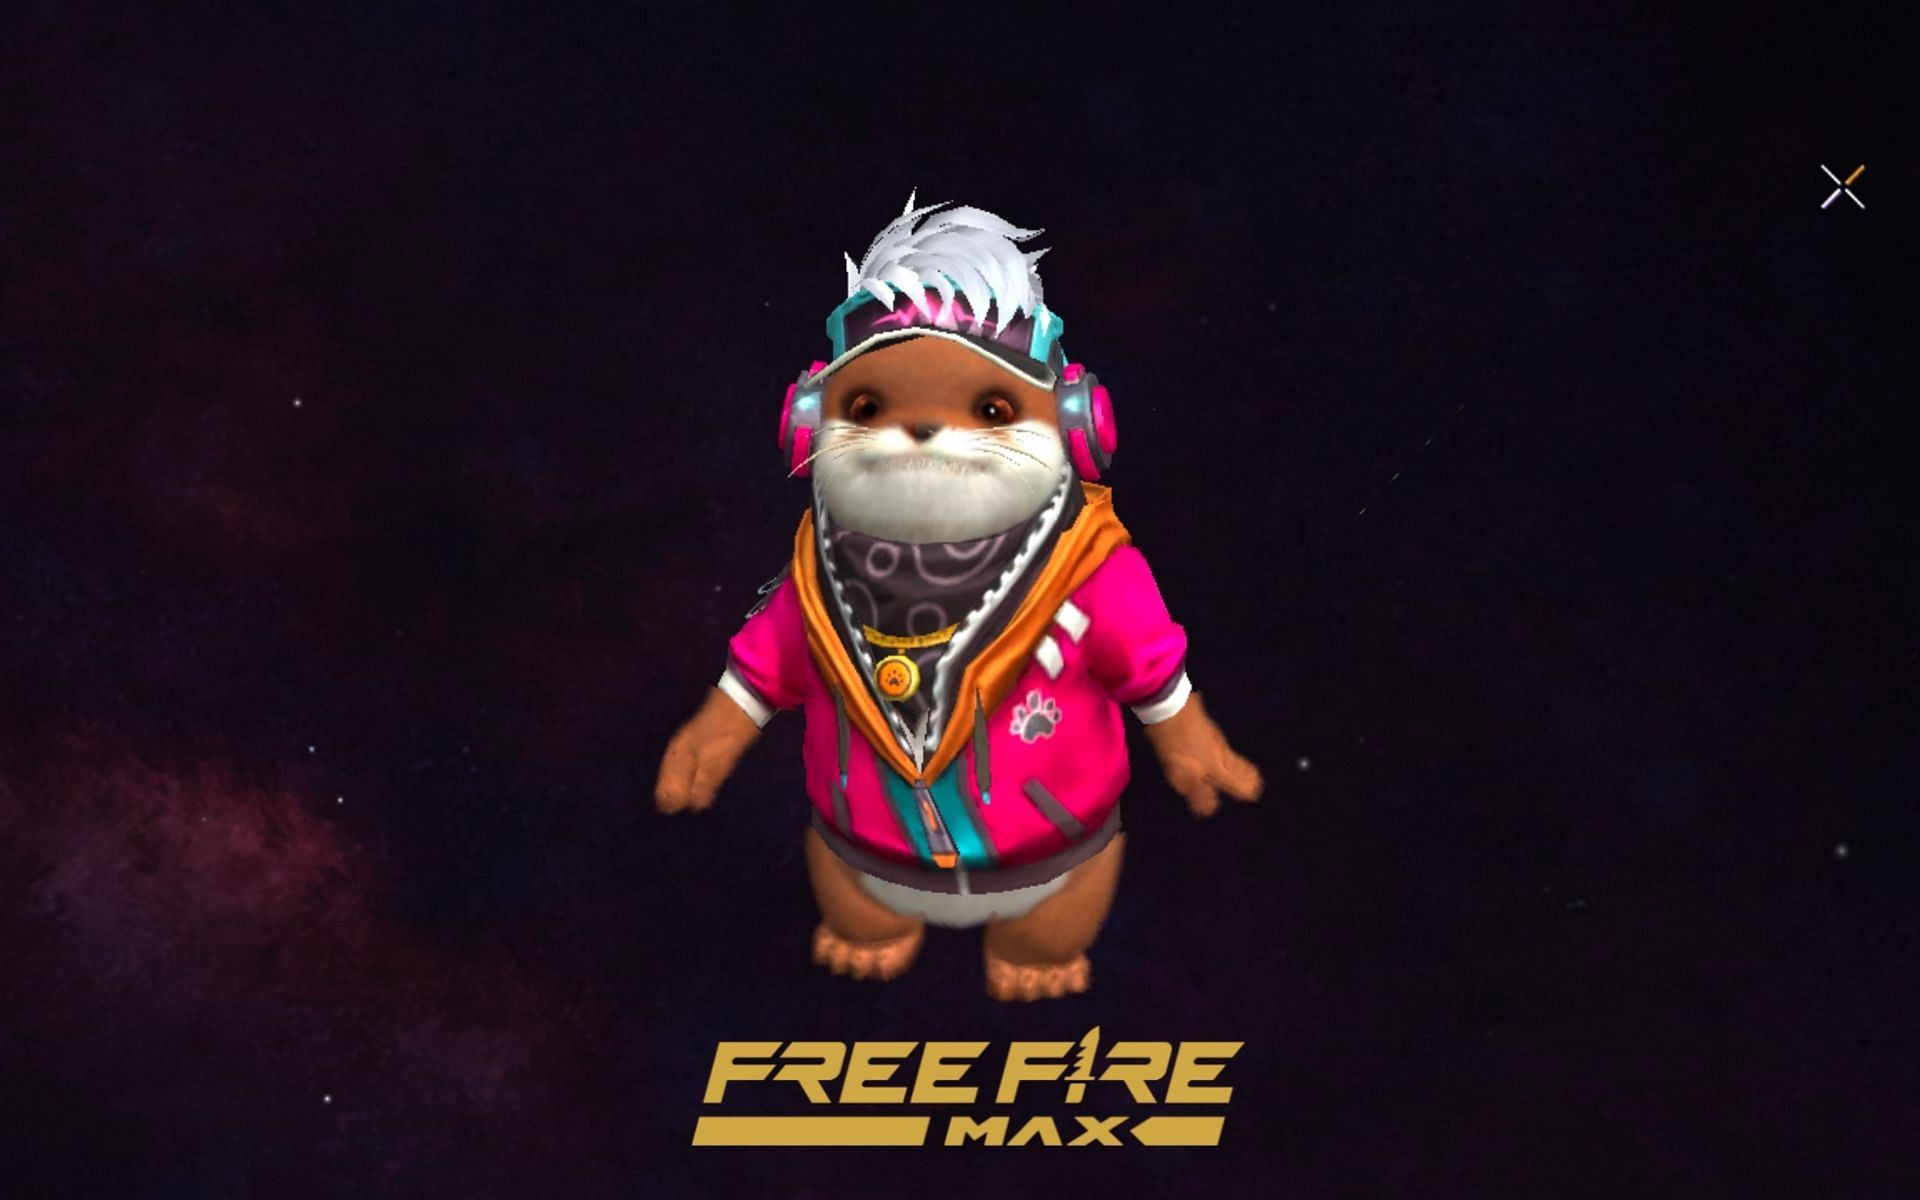 How to get free rewards in Free Fire MAX by inviting newbies? (Image via Garena)